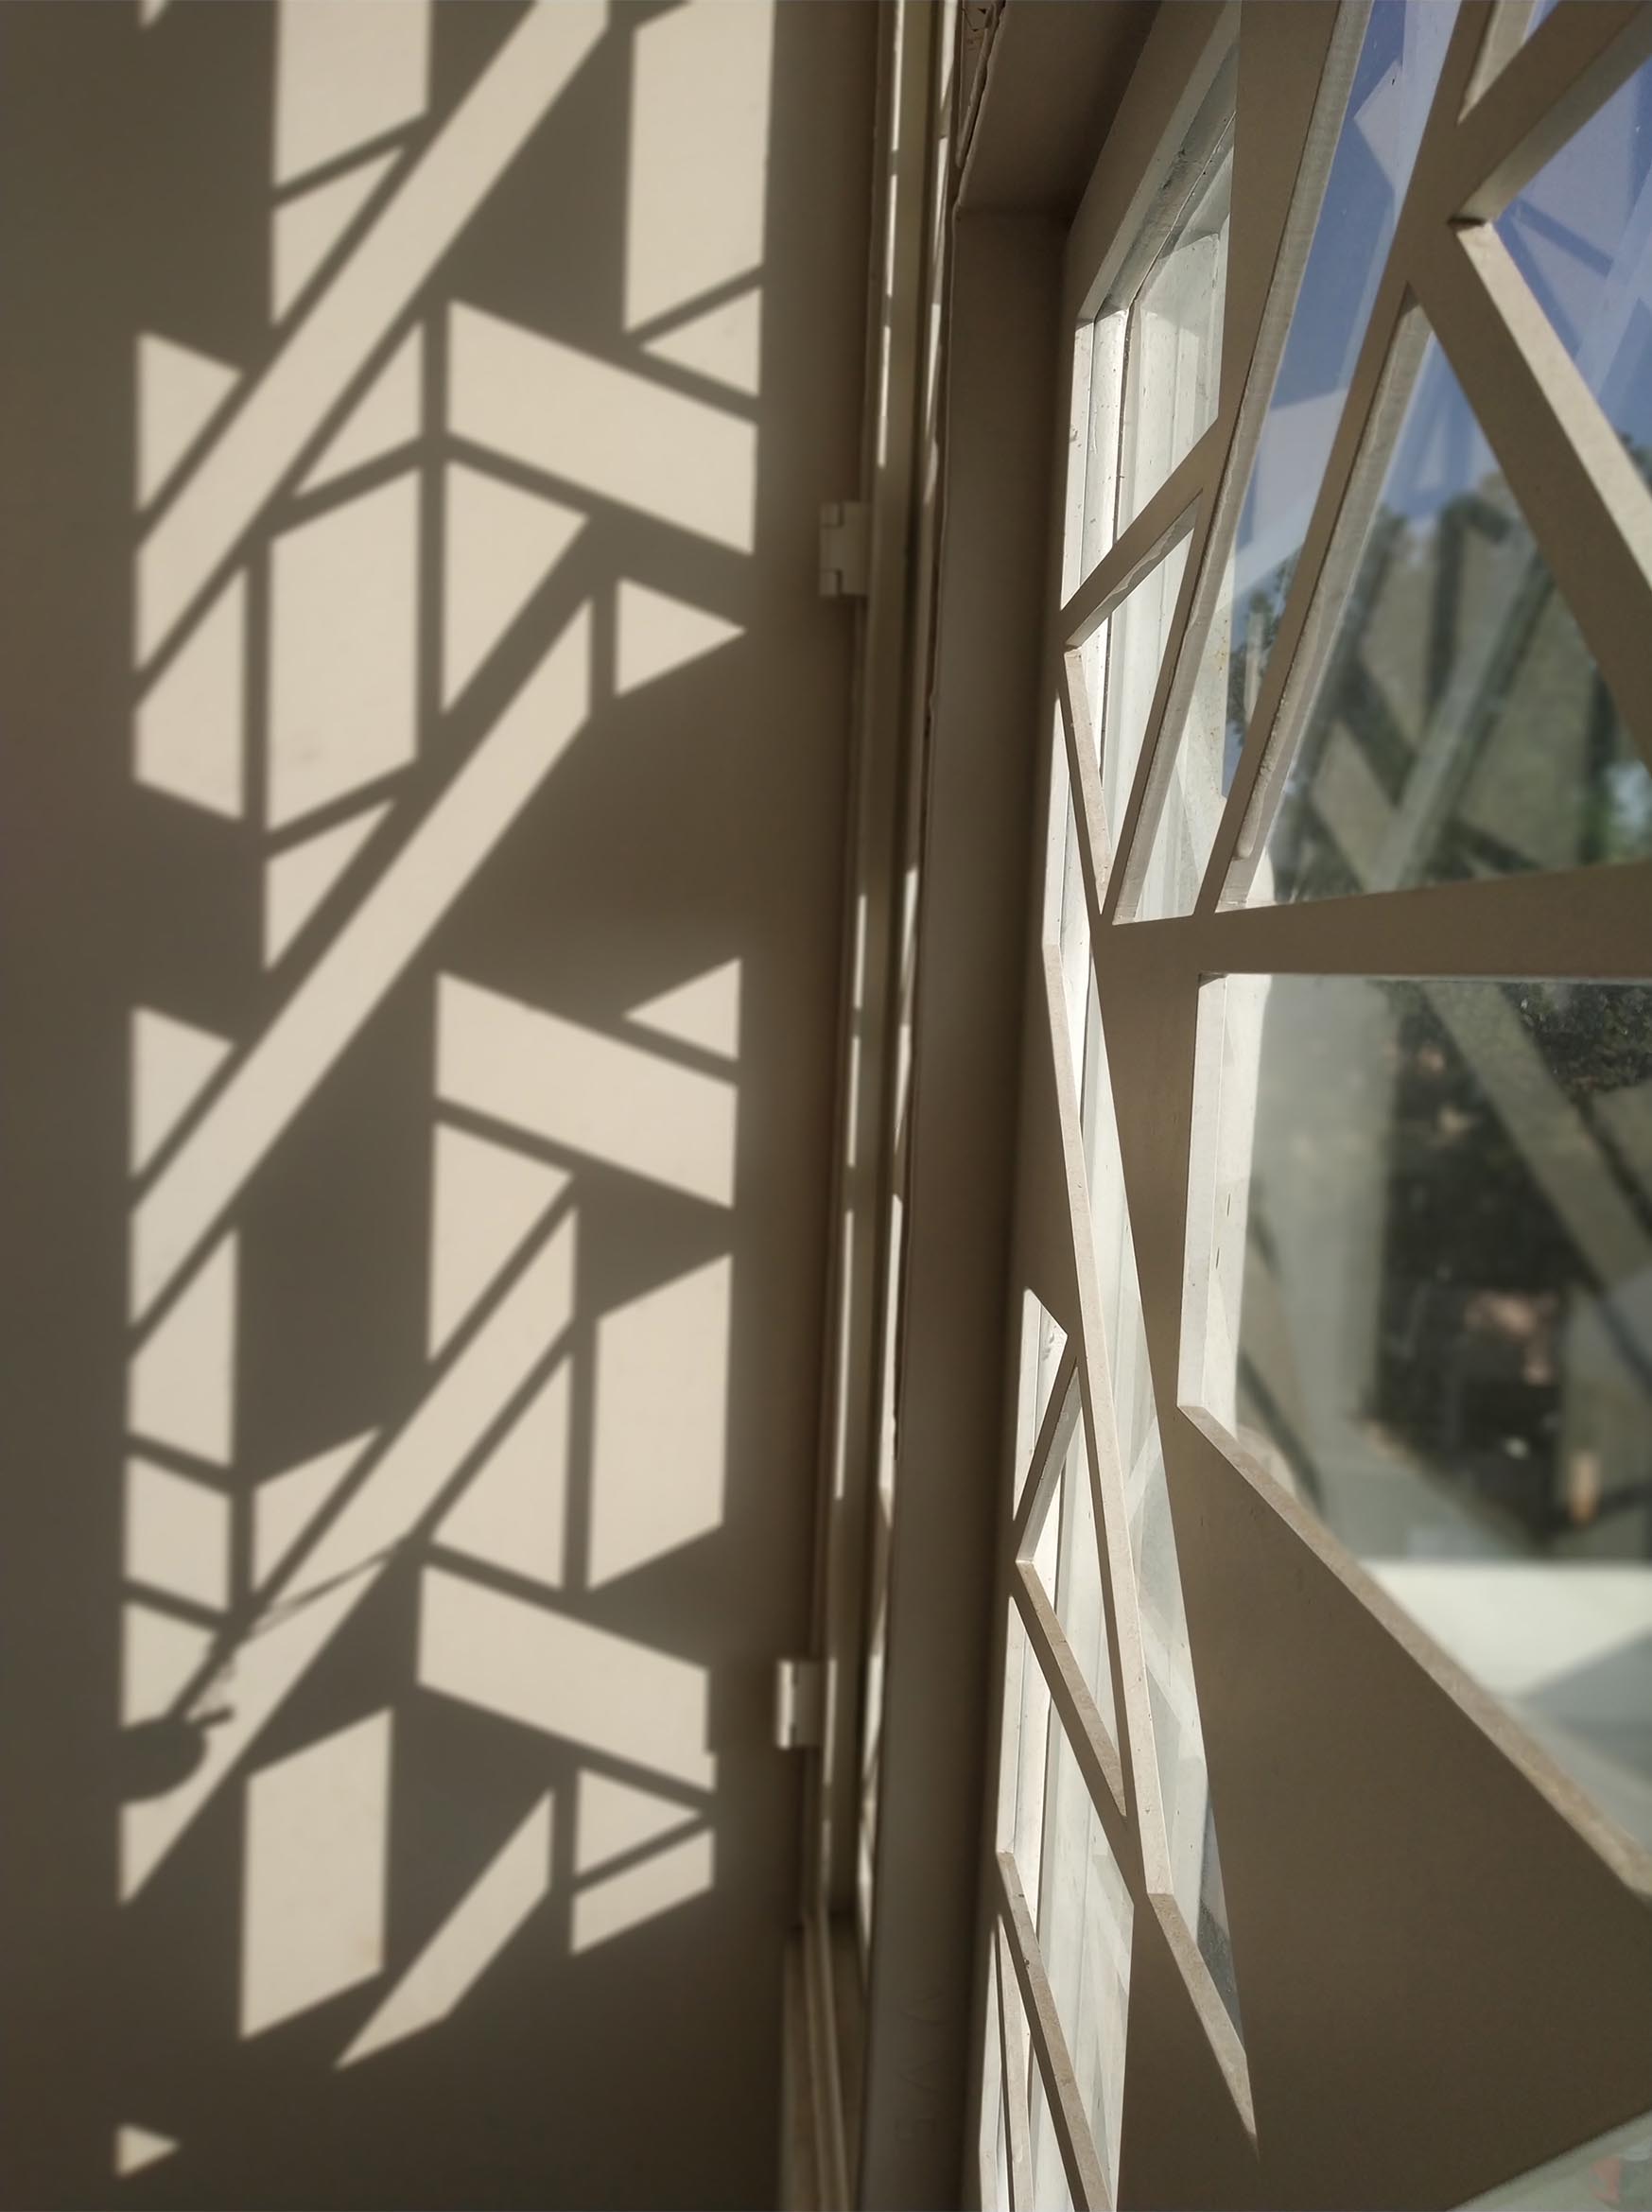 A white window screen with a geometric design casts interesting shadows on the walls and floor.